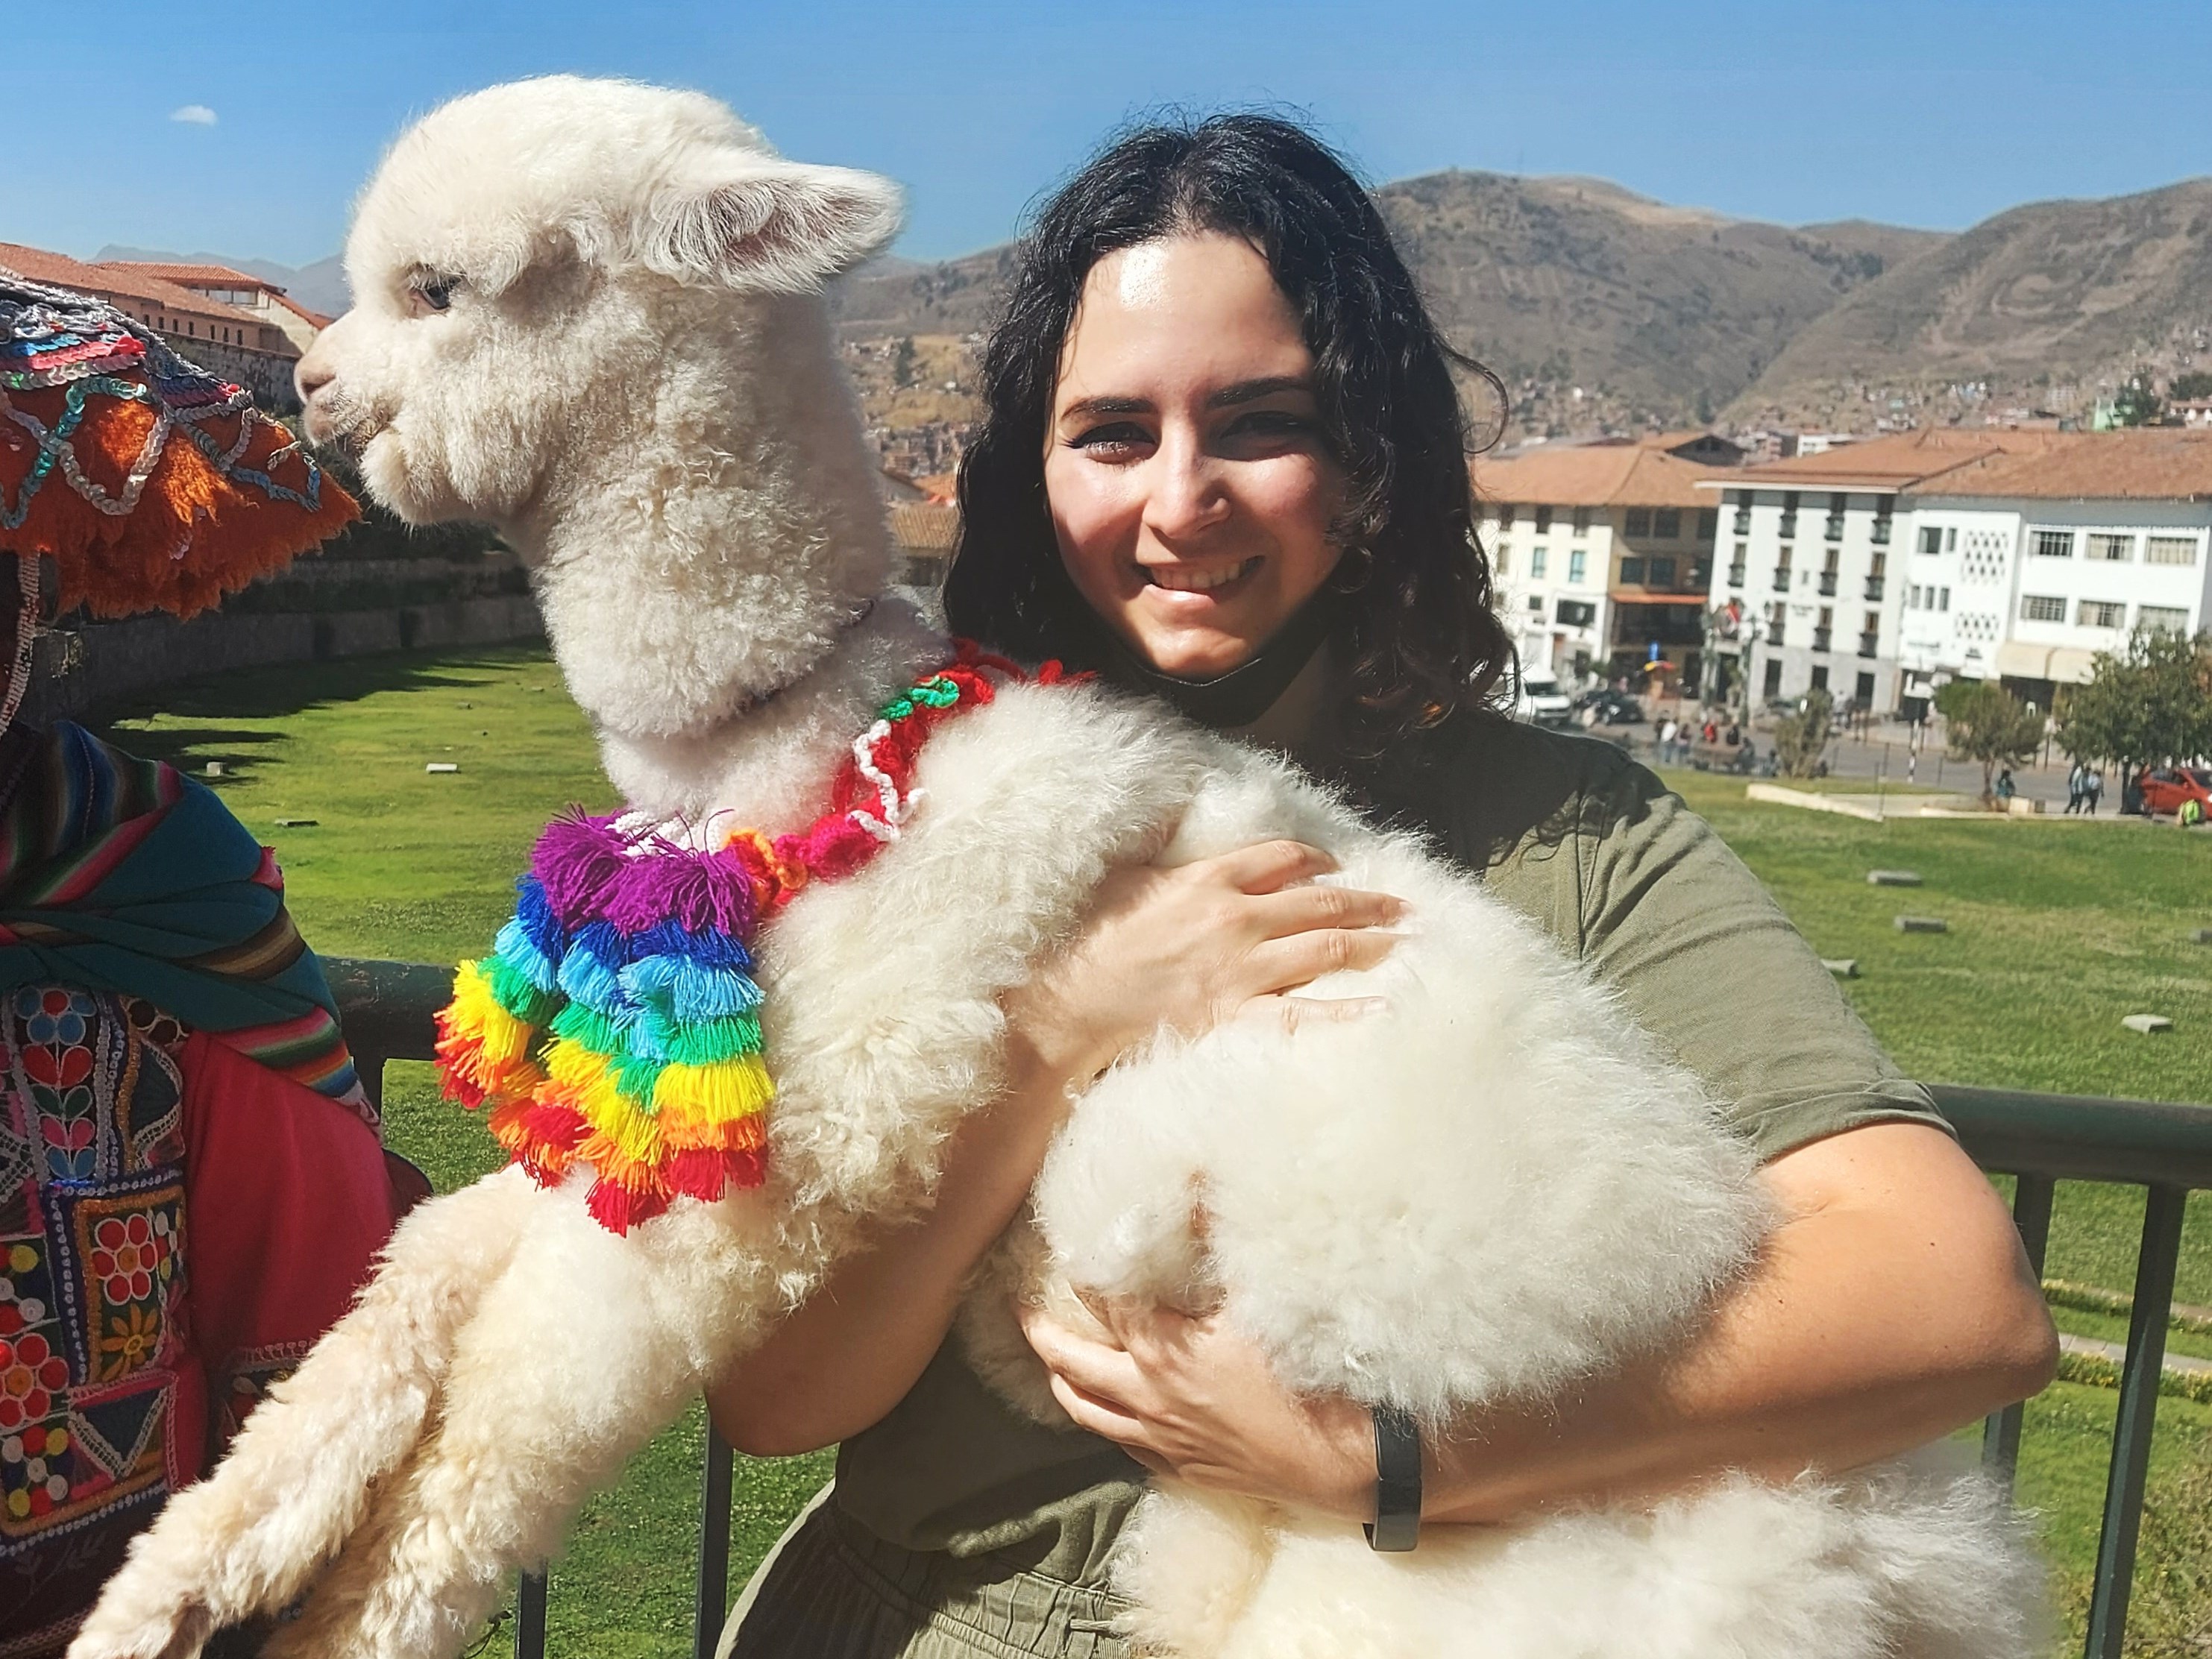 Mara's Peruvian experience during the Summer 2022 Faculty-led Program Abroad